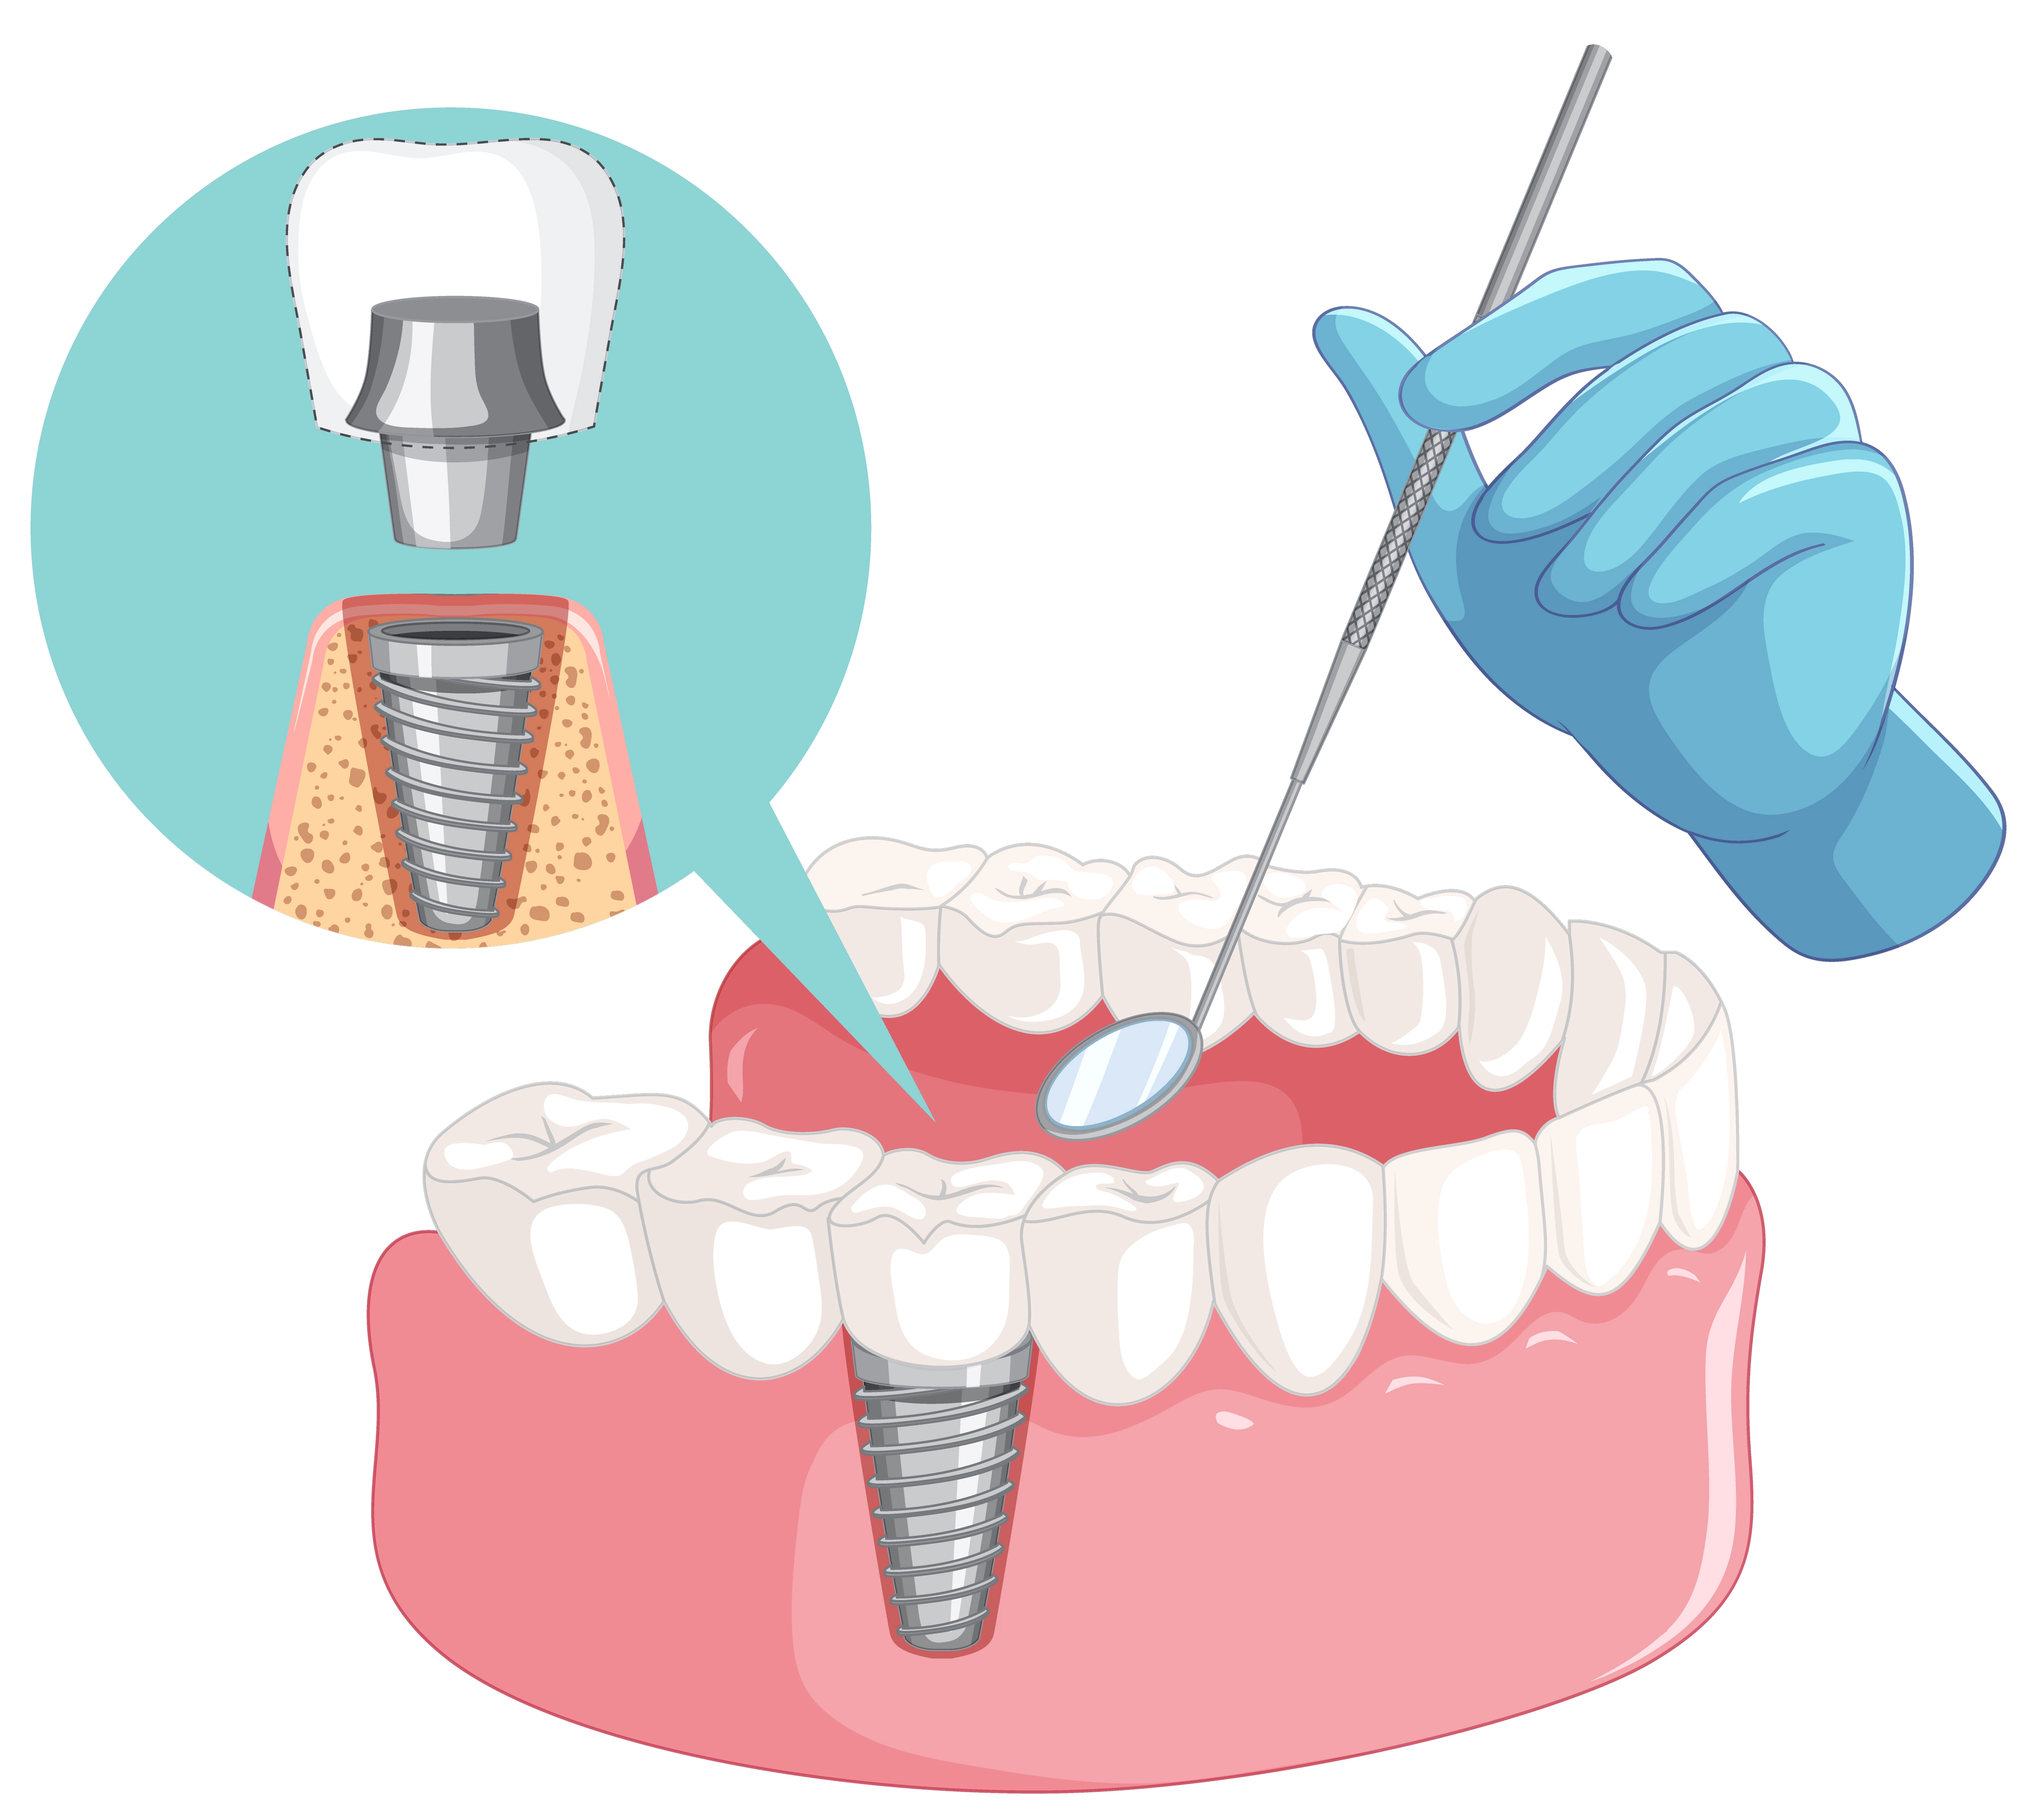 dental-implant-outcomes-the-impact-of-accurate-3d-printing-technology